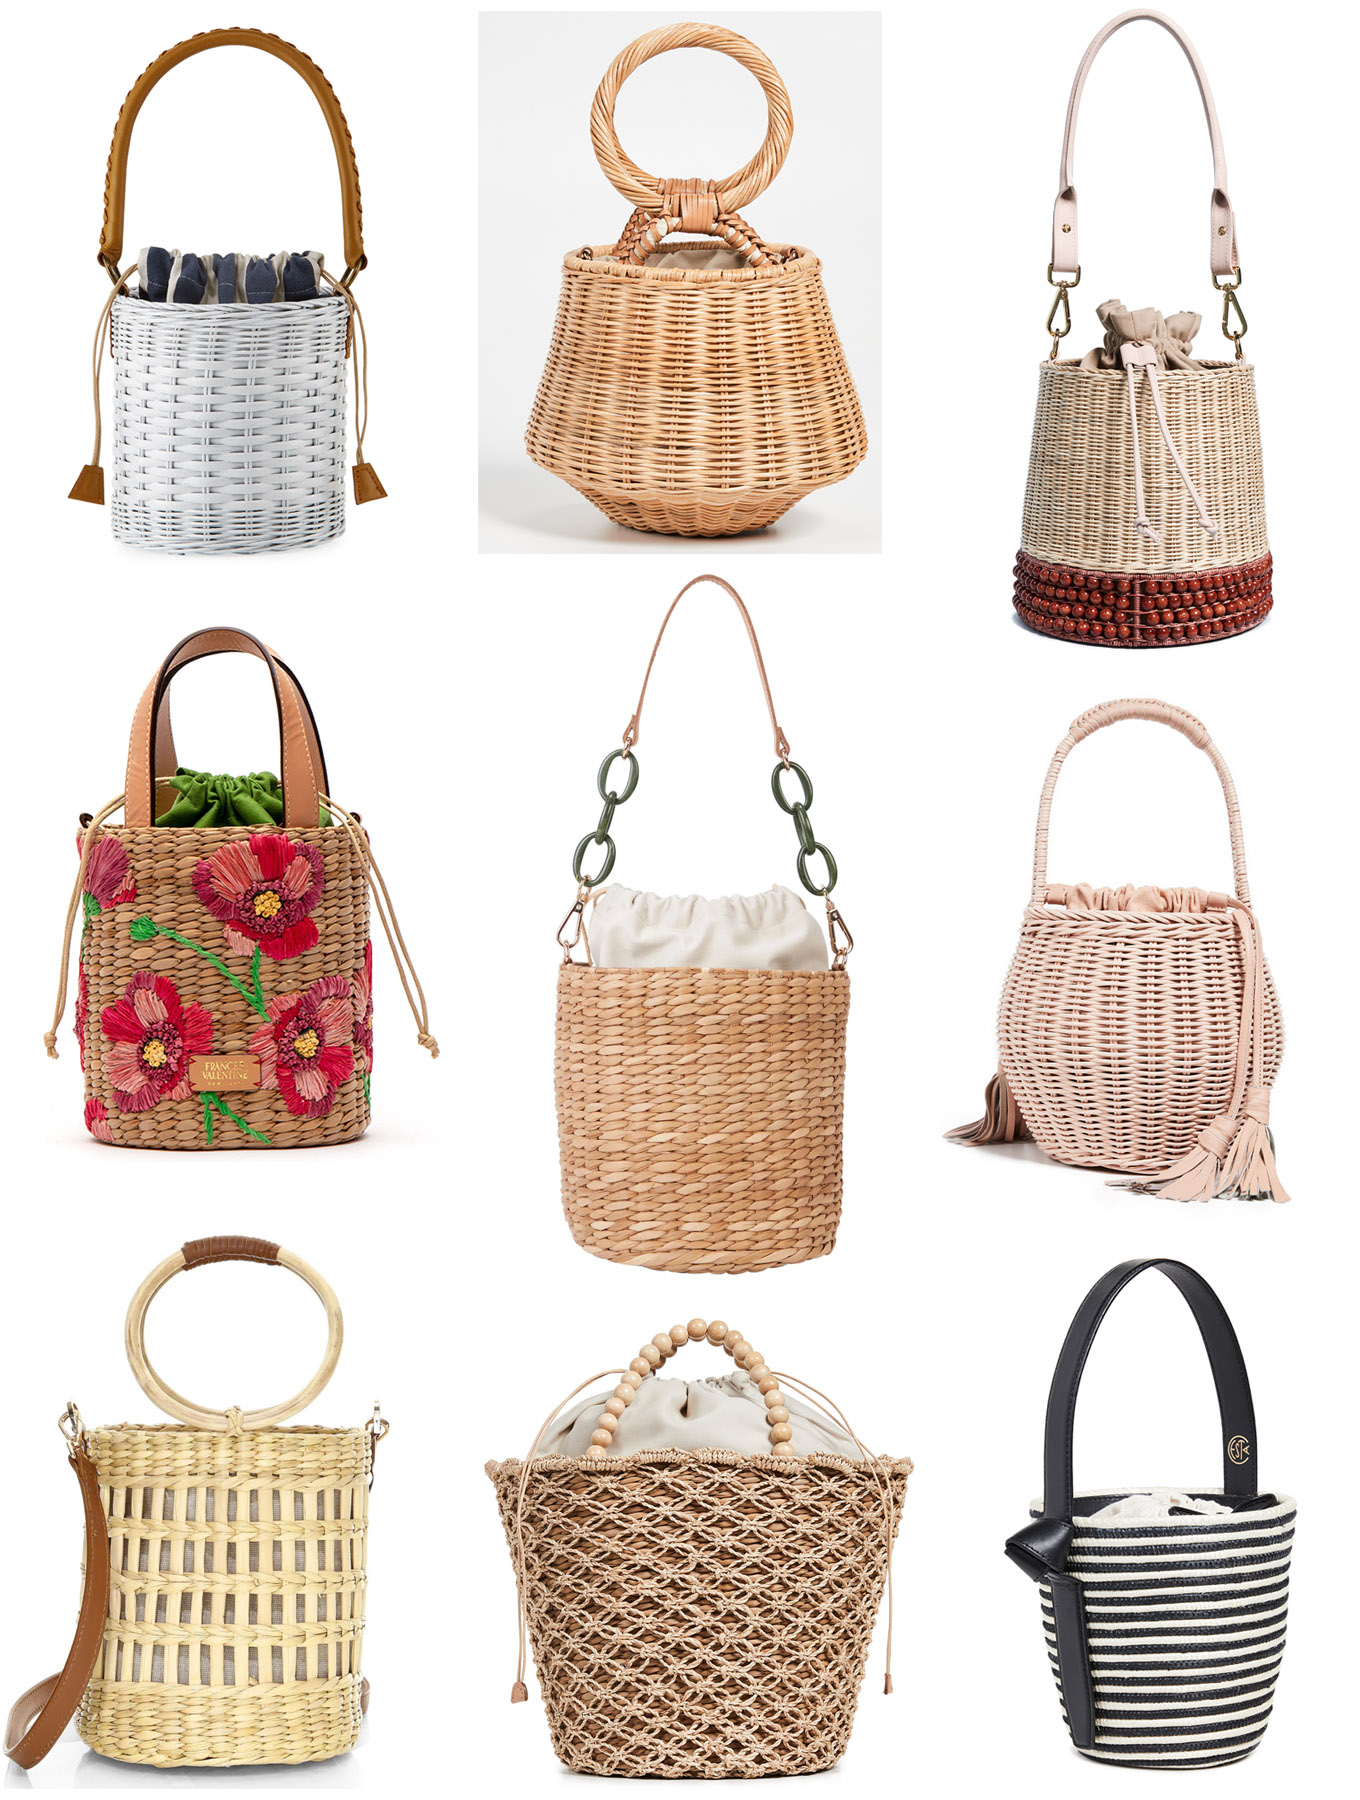 Have you noticed that bucket bags with a drawstring lining are trending now? Ridgely Brode rounds up her favorites and can't pick just one!